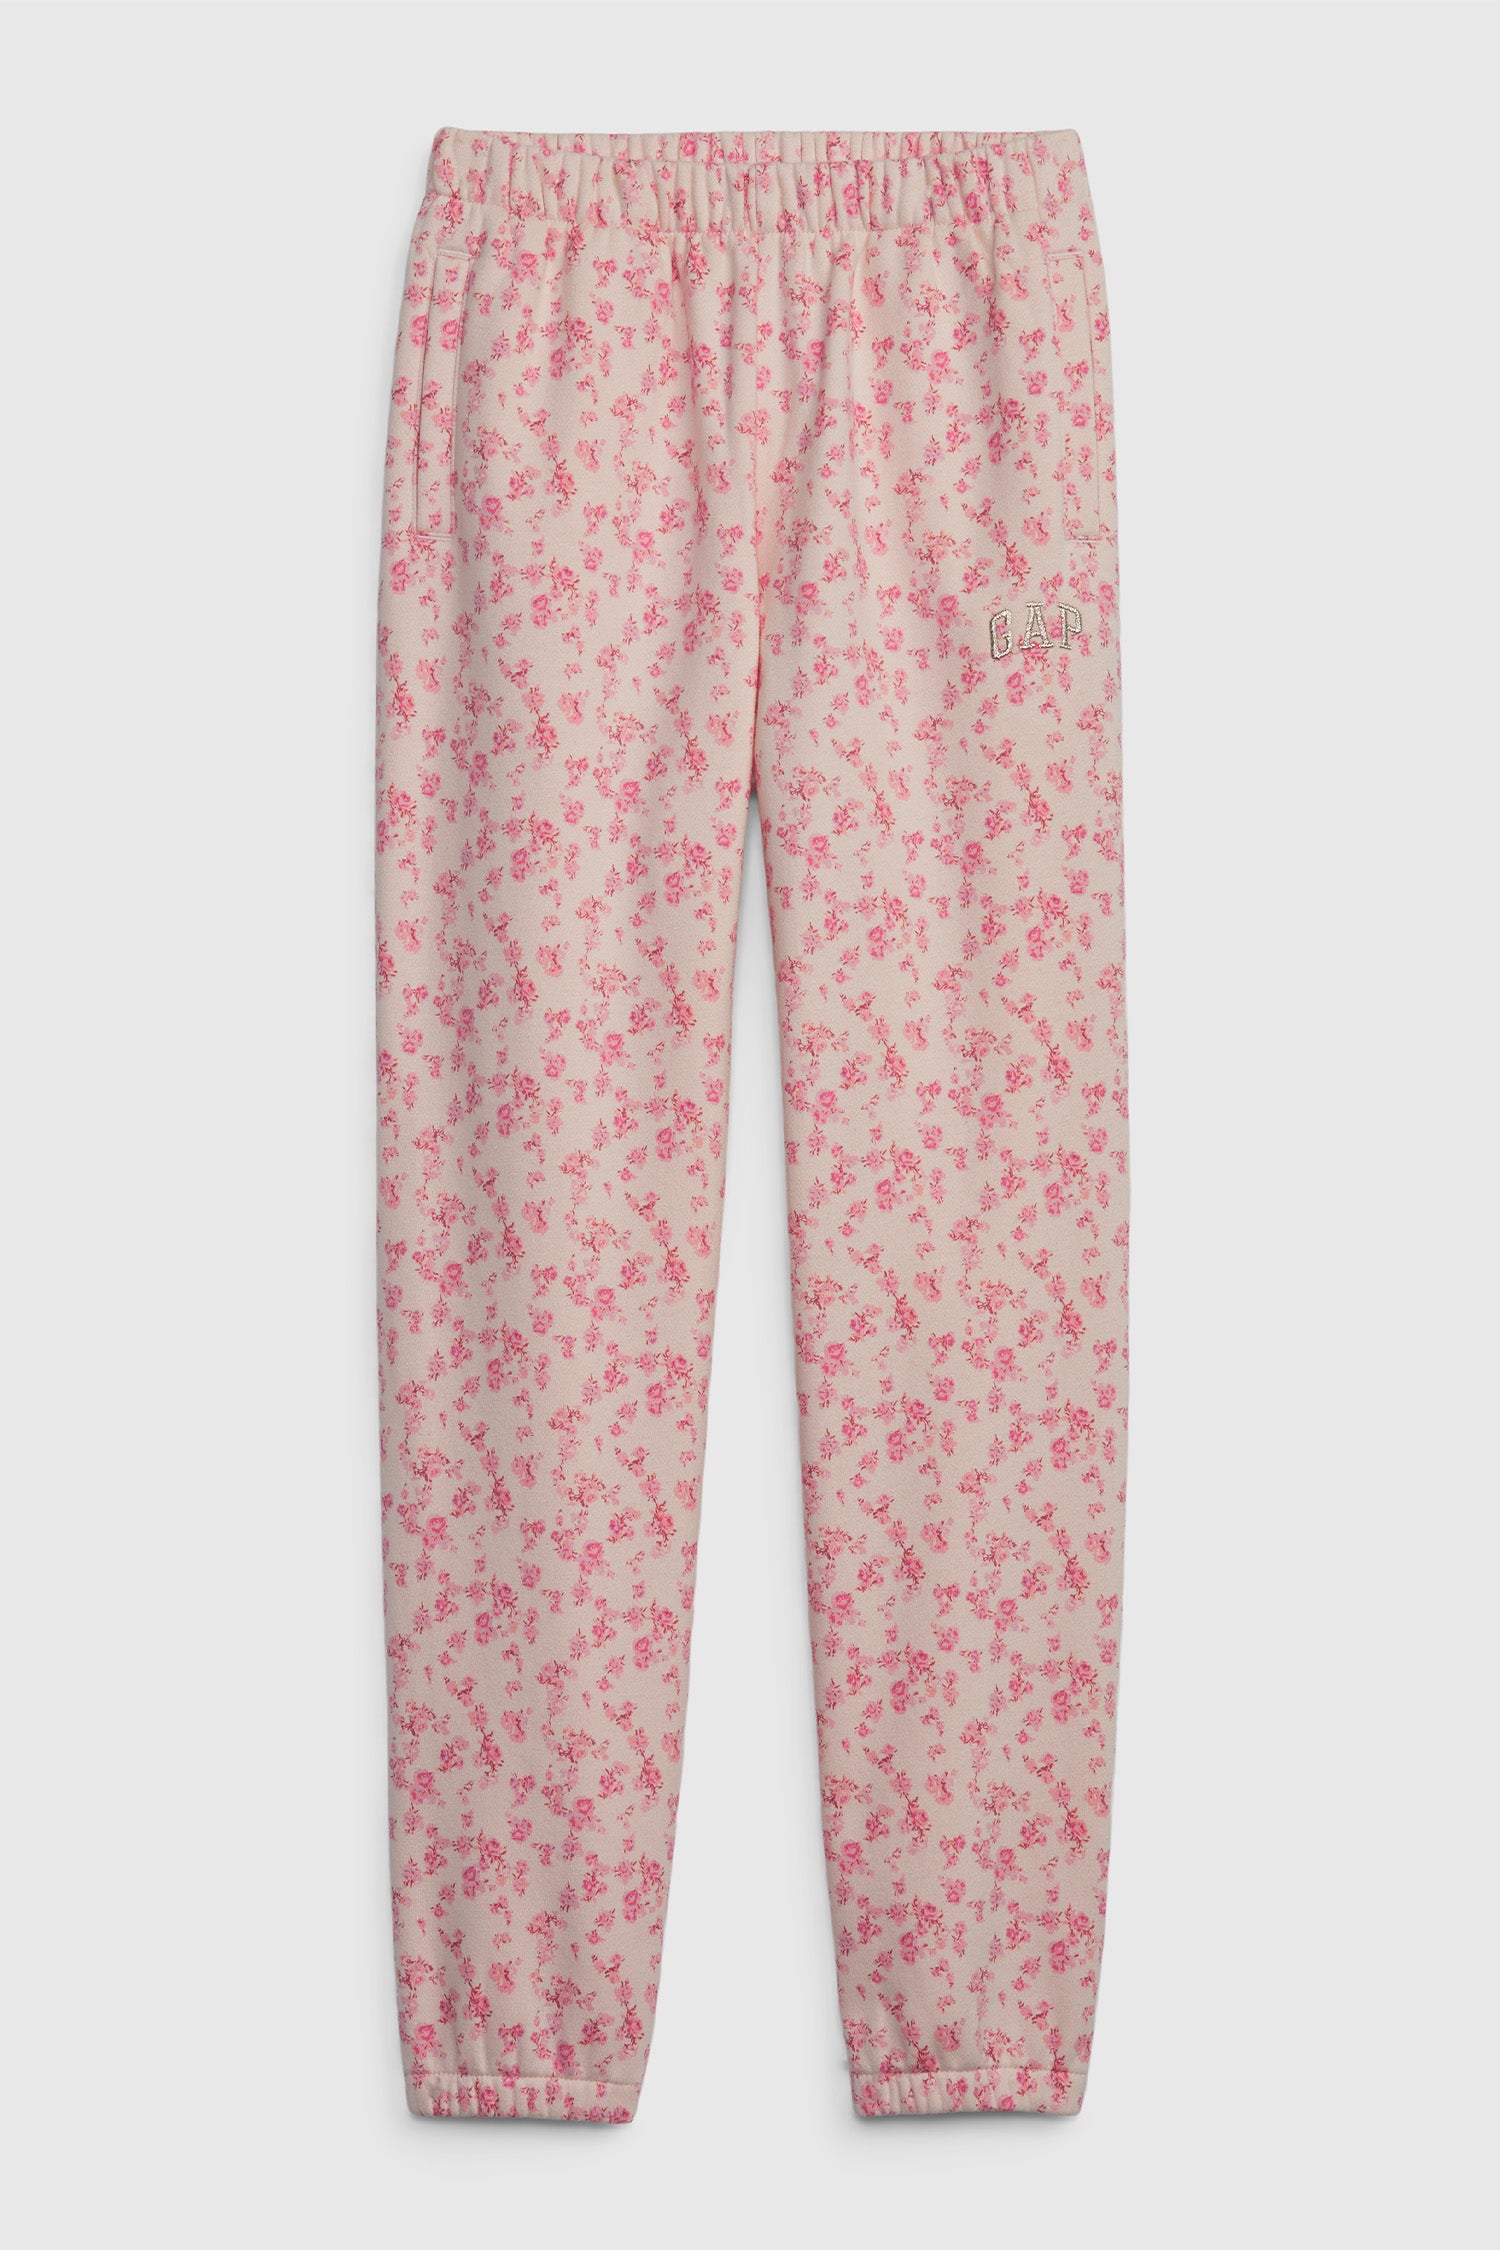 Kids pink floral joggers with GAP logo on leg